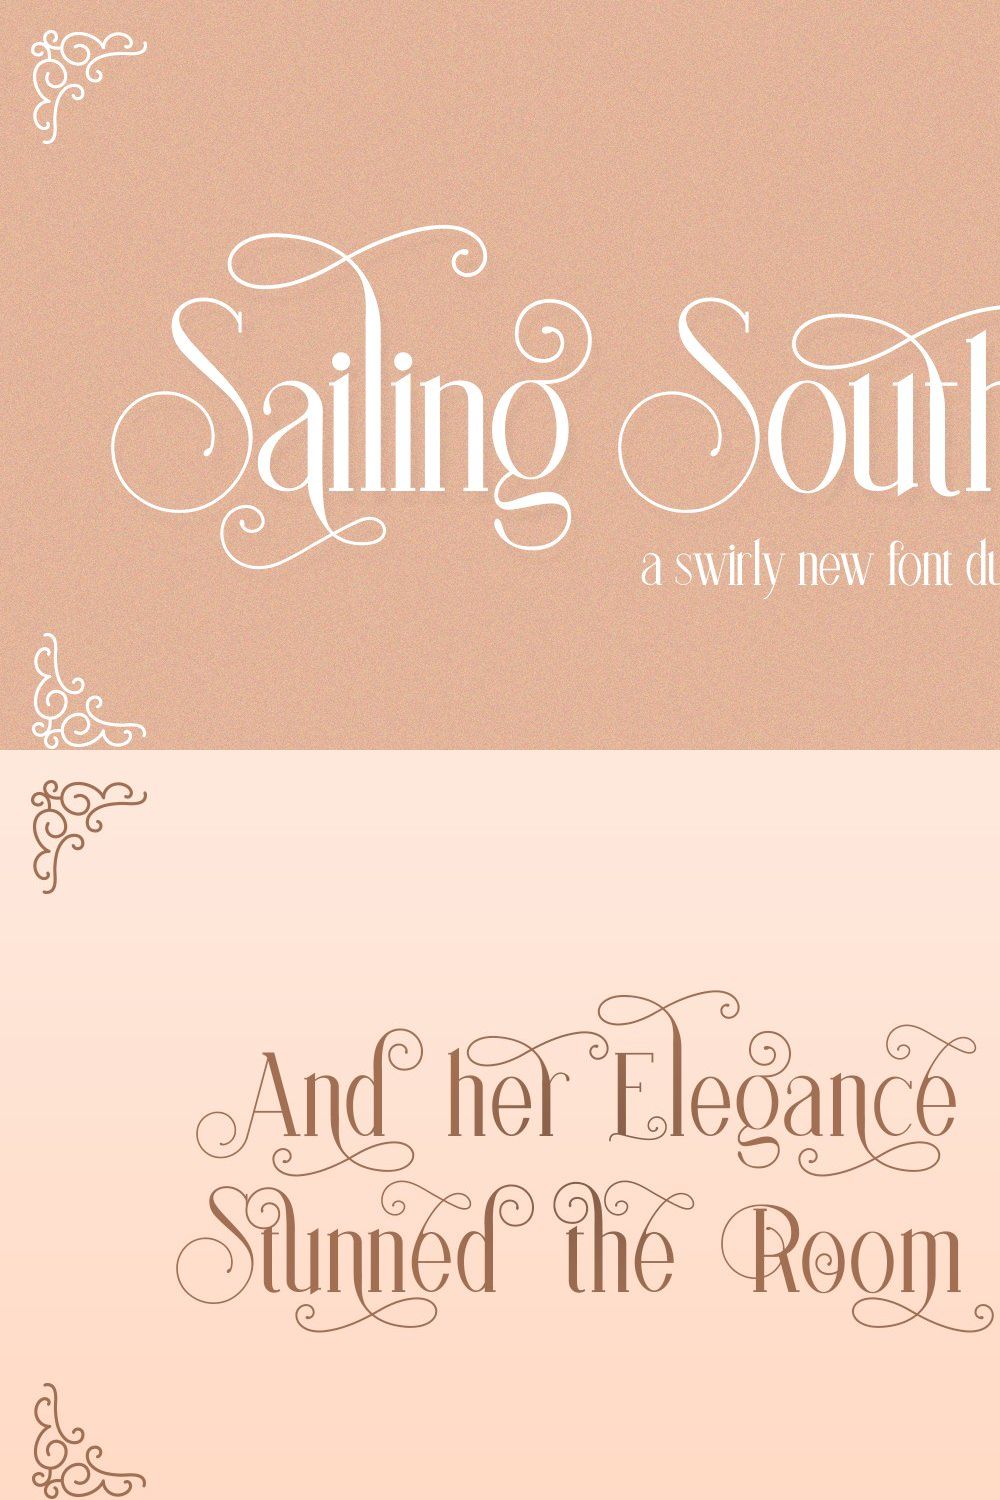 Sailing South Font Duo pinterest preview image.